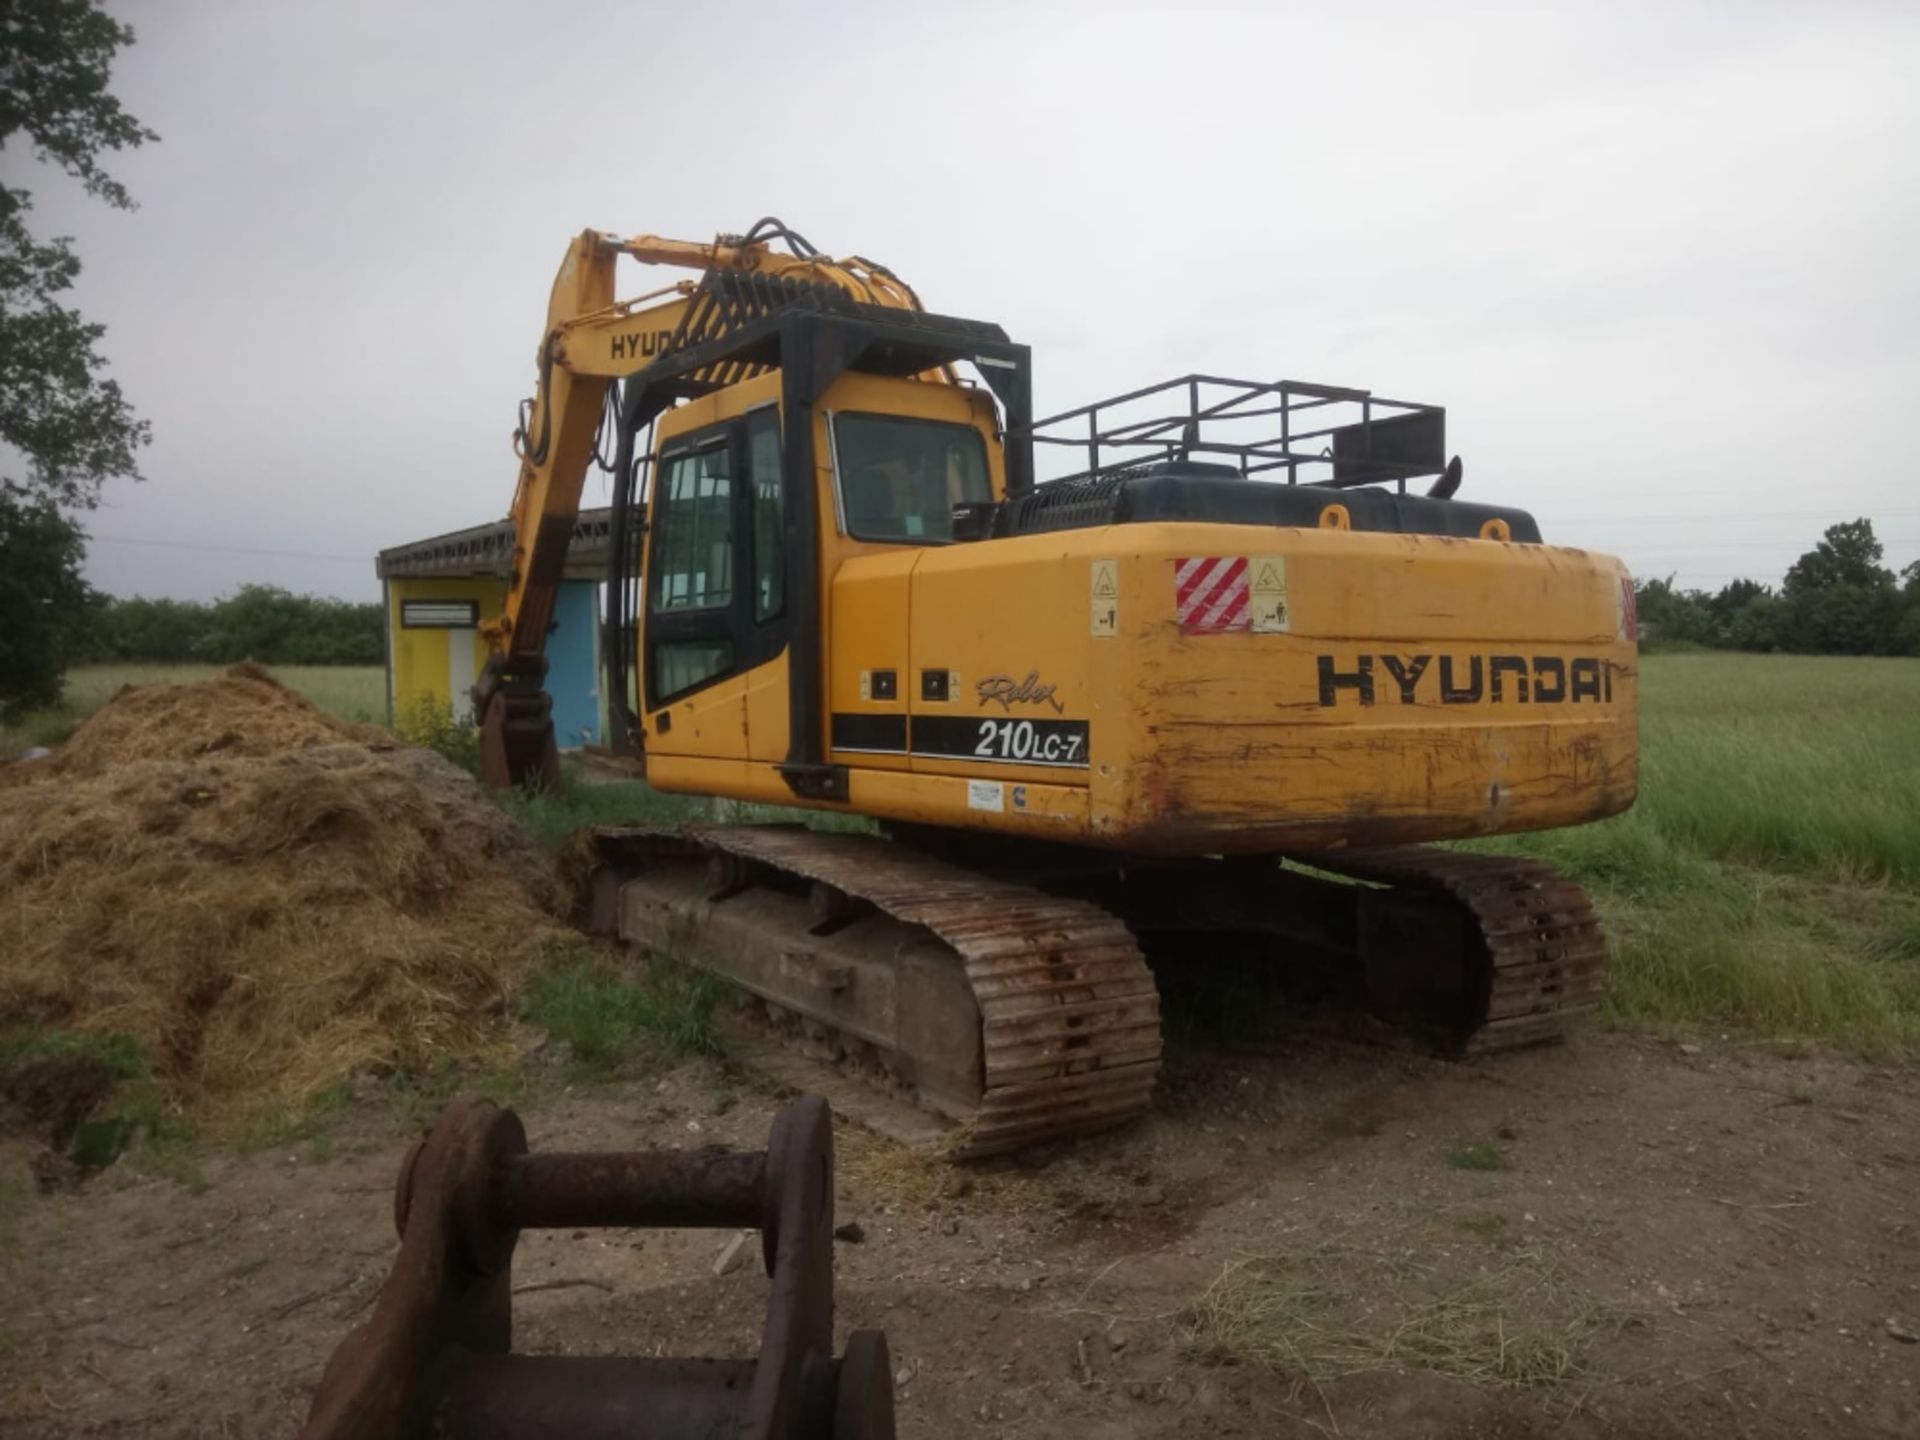 HYUNDAI 210LC-7 21TONNE EXCAVATOR BELIEVED TO BE YEAR 2004 BUILD. WHEN TESTED WAS SEEN TO RUN,